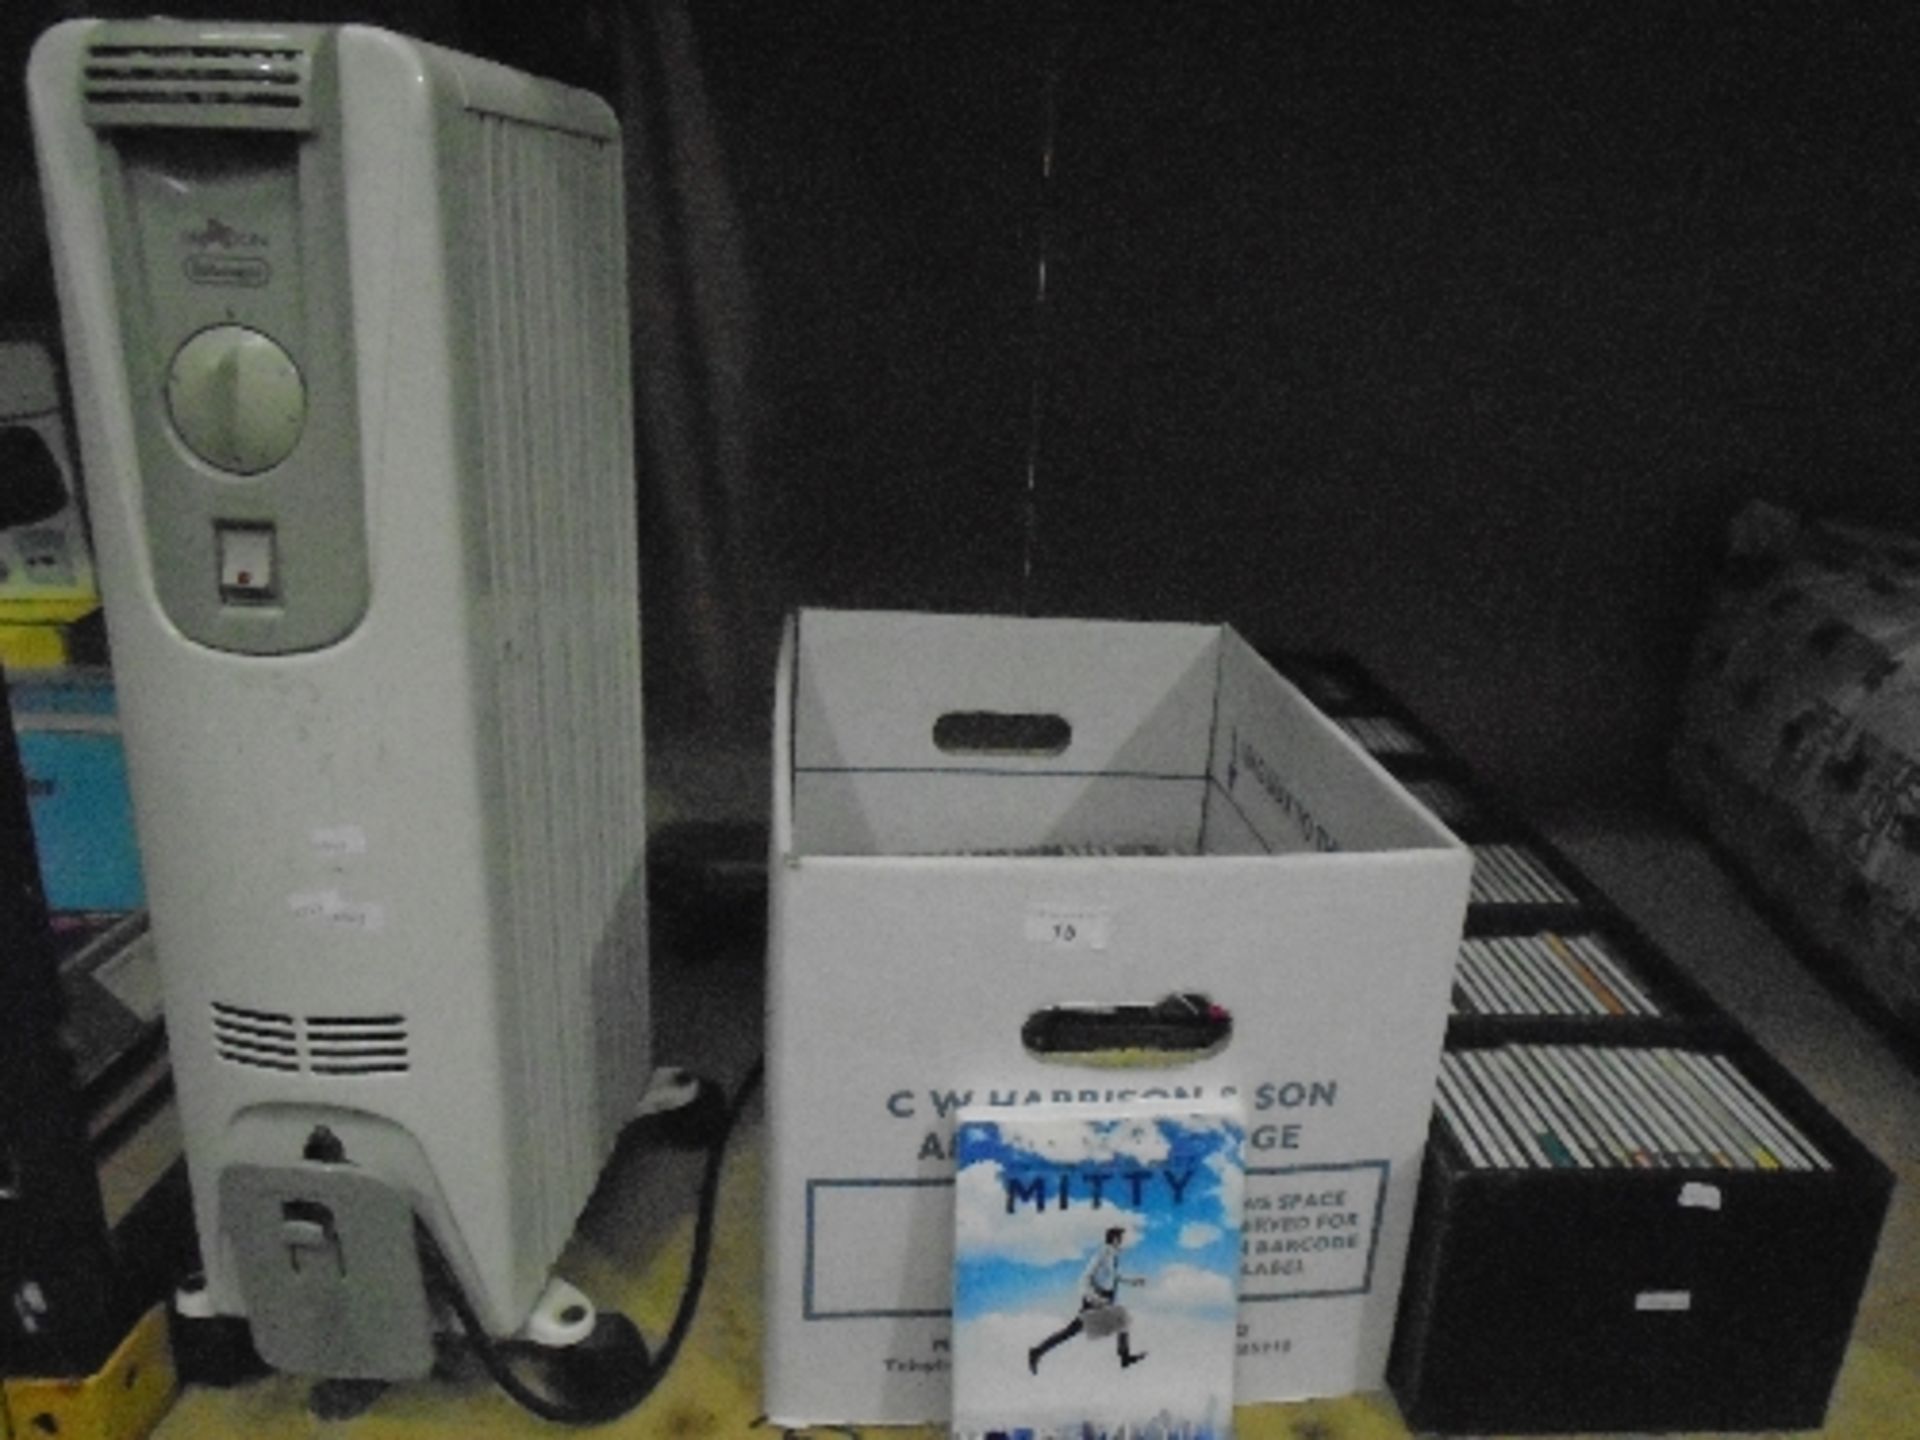 A Delonghi Dragon oil filled radiator - 240v and a quantity of assorted CDs and DVDs (mainly